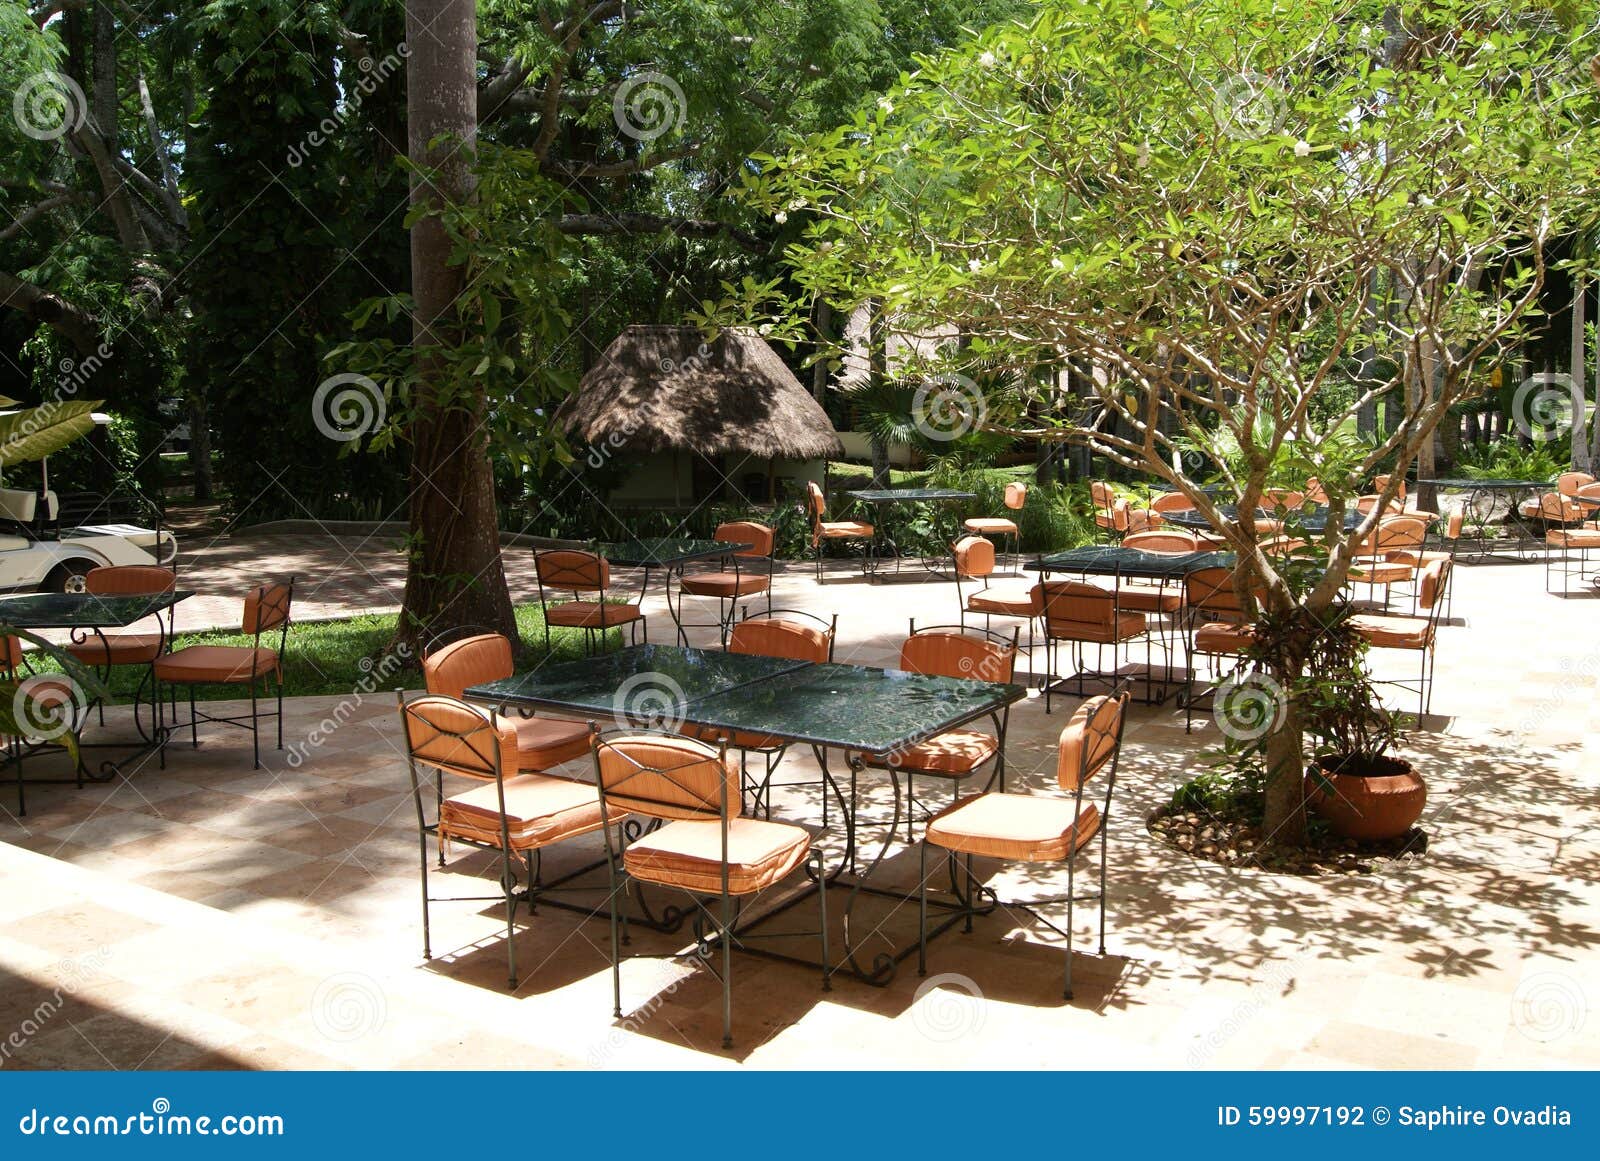 Patio With Tables And Chairs Stock Photo Image Of Furniture